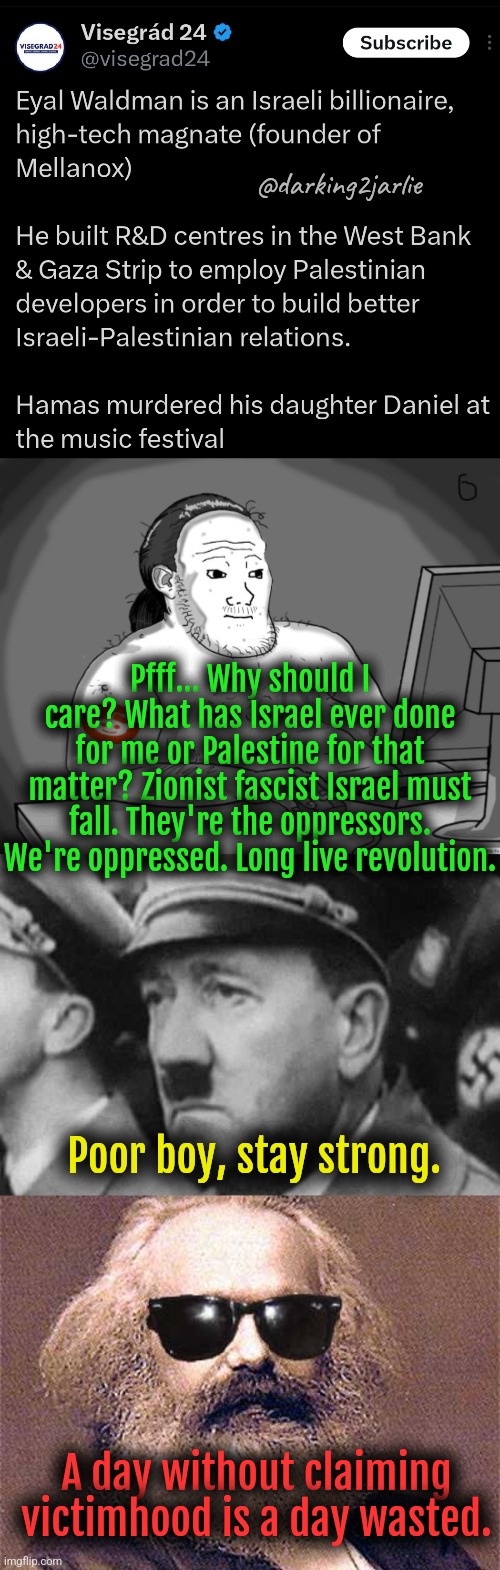 Victimhood Weekly meme | @darking2jarlie; Pfff... Why should I care? What has Israel ever done for me or Palestine for that matter? Zionist fascist Israel must fall. They're the oppressors. We're oppressed. Long live revolution. Poor boy, stay strong. A day without claiming victimhood is a day wasted. | image tagged in israel,jews,palestine,marxism,liberal logic,nazi | made w/ Imgflip meme maker